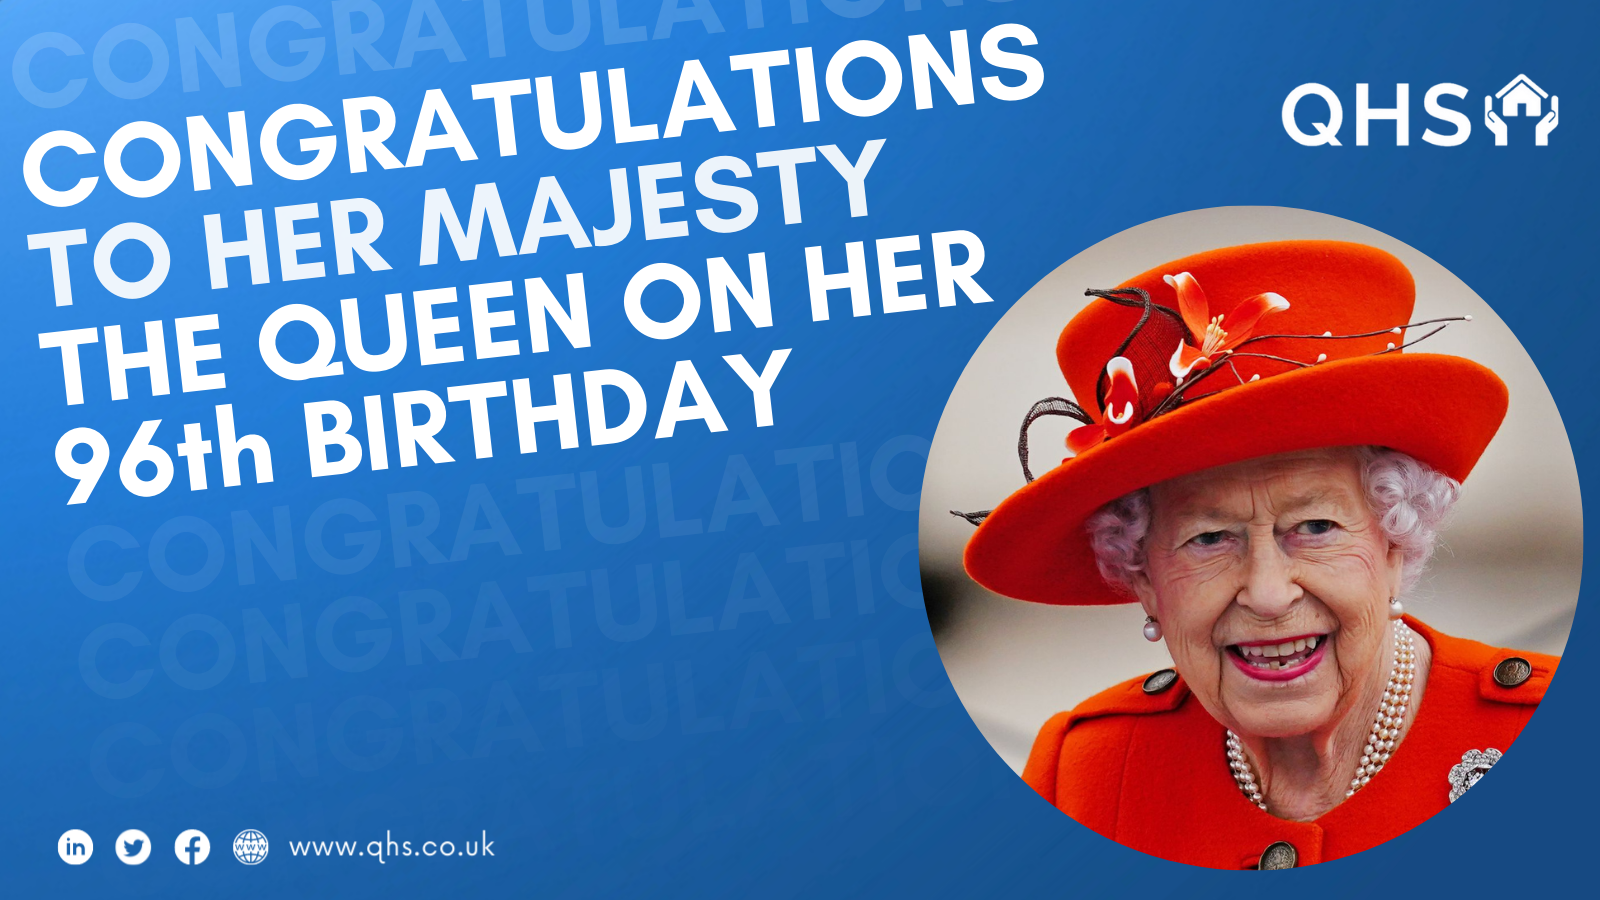 Her Royal Highness Celebrates Her 96th Birthday Today